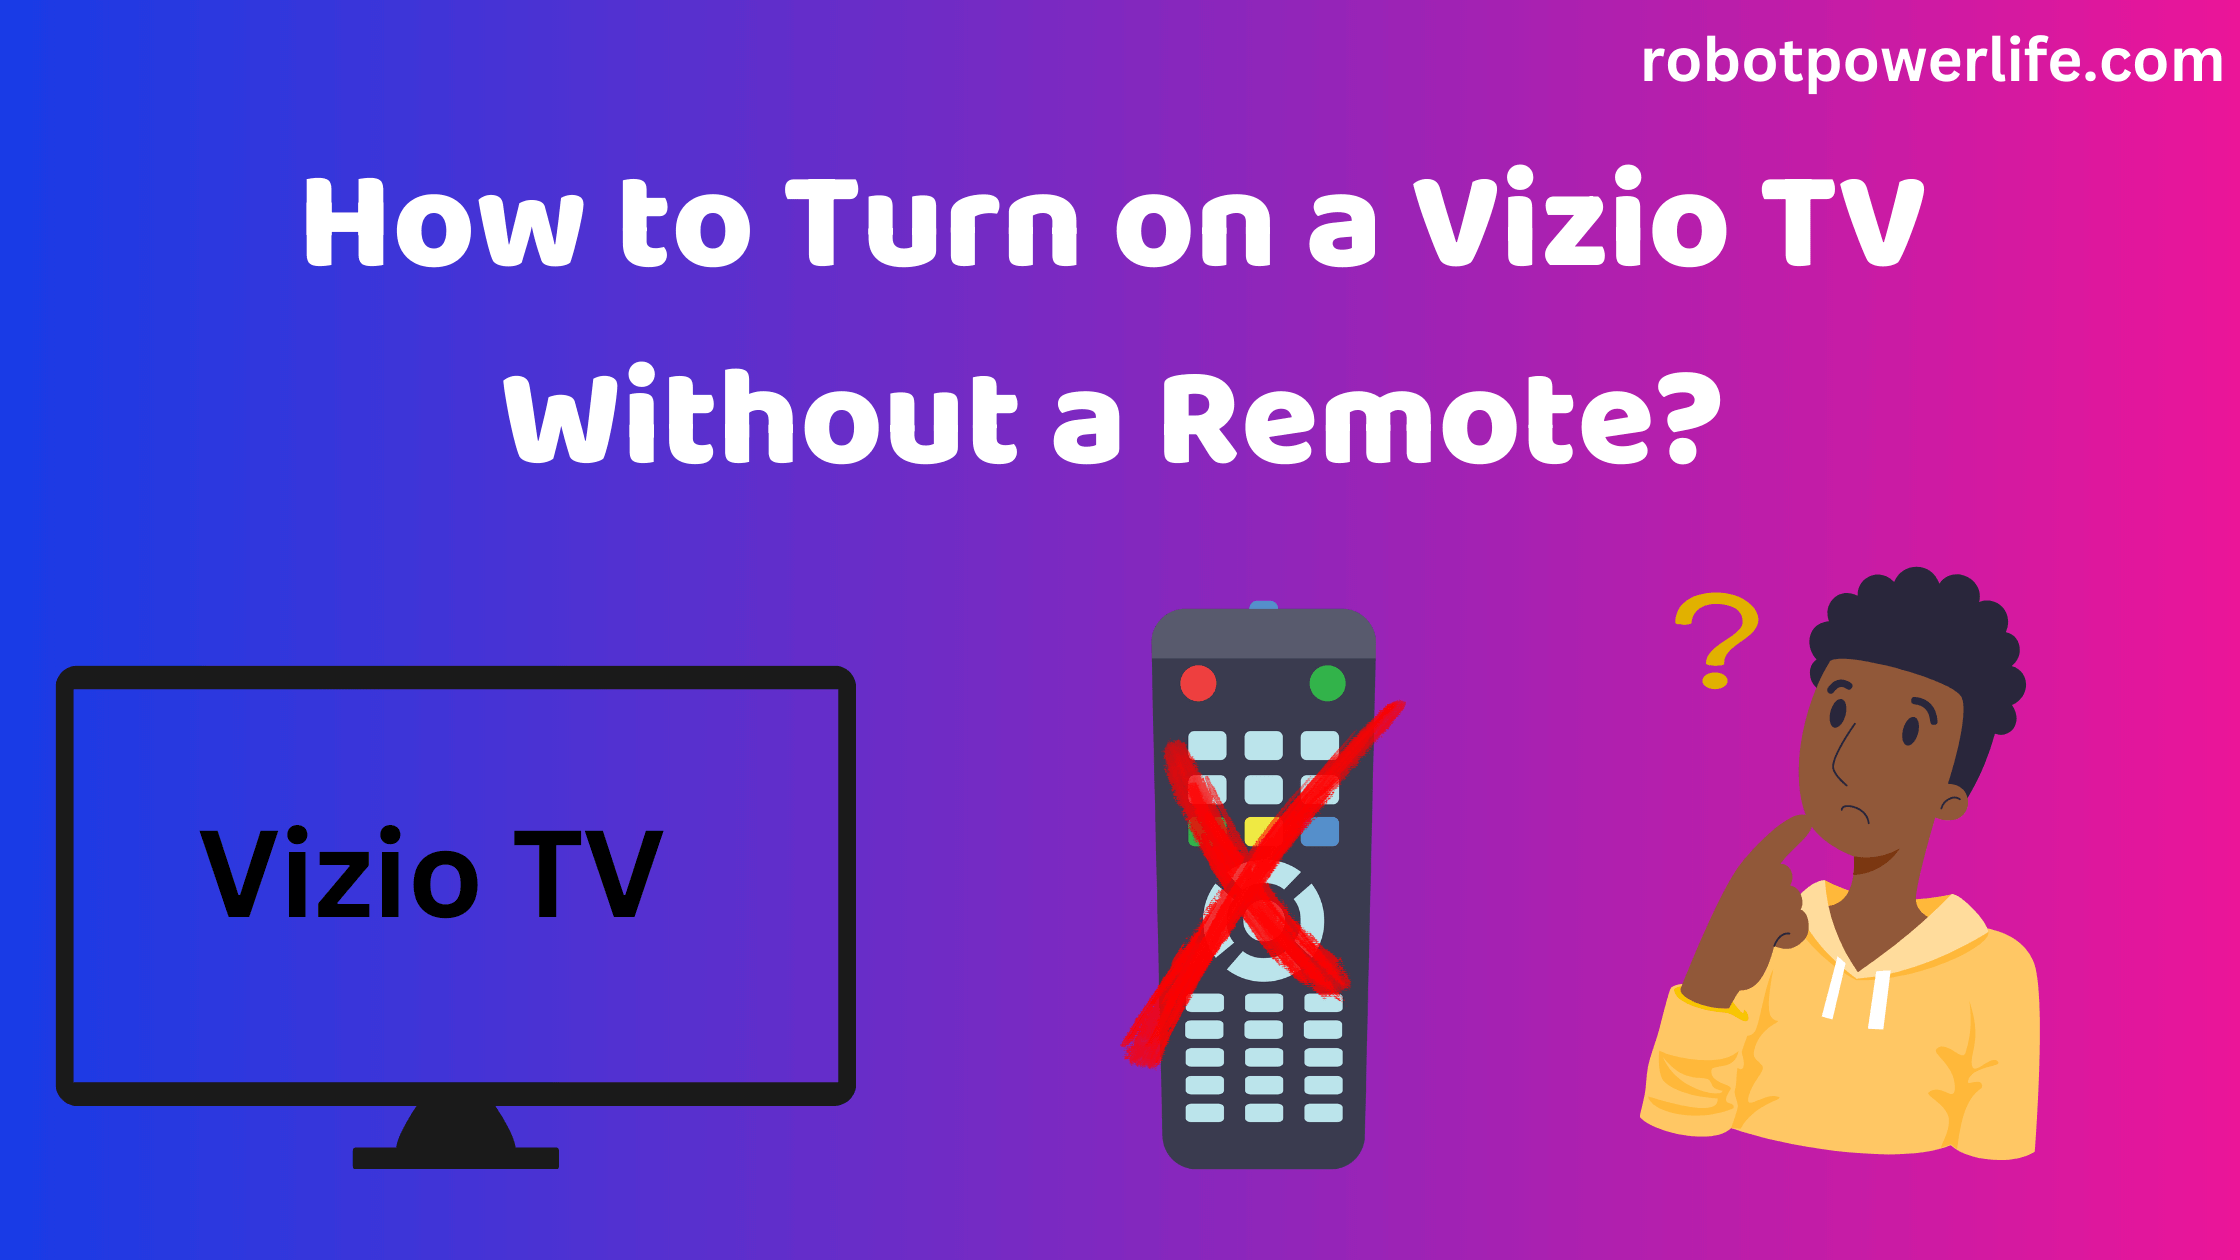 How to Turn on a Vizio TV Without a Remote?